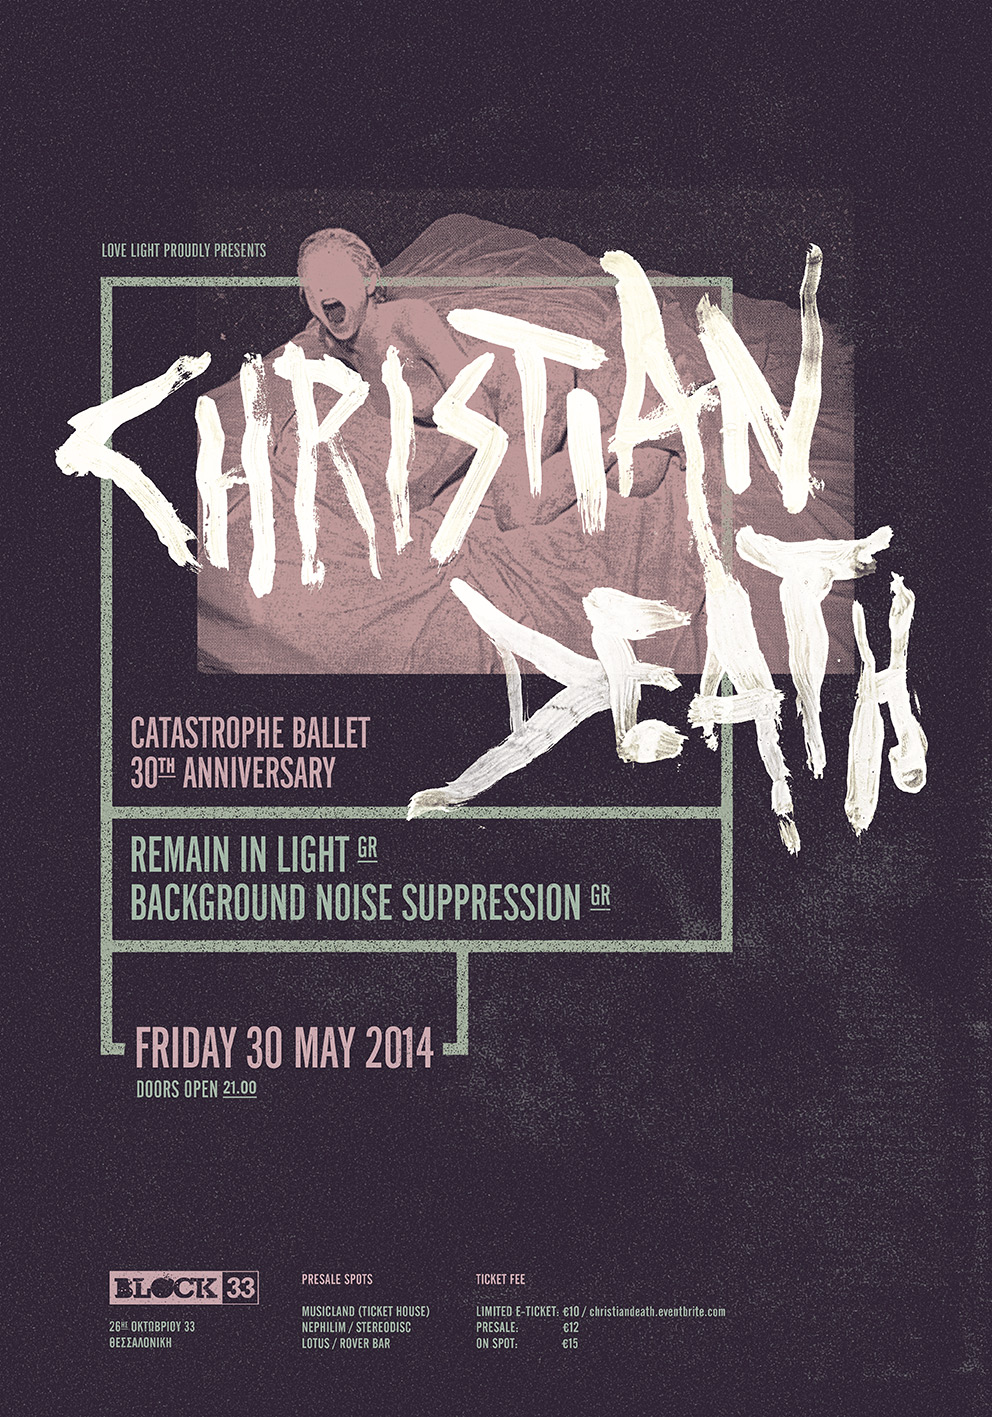 Christian Death poster